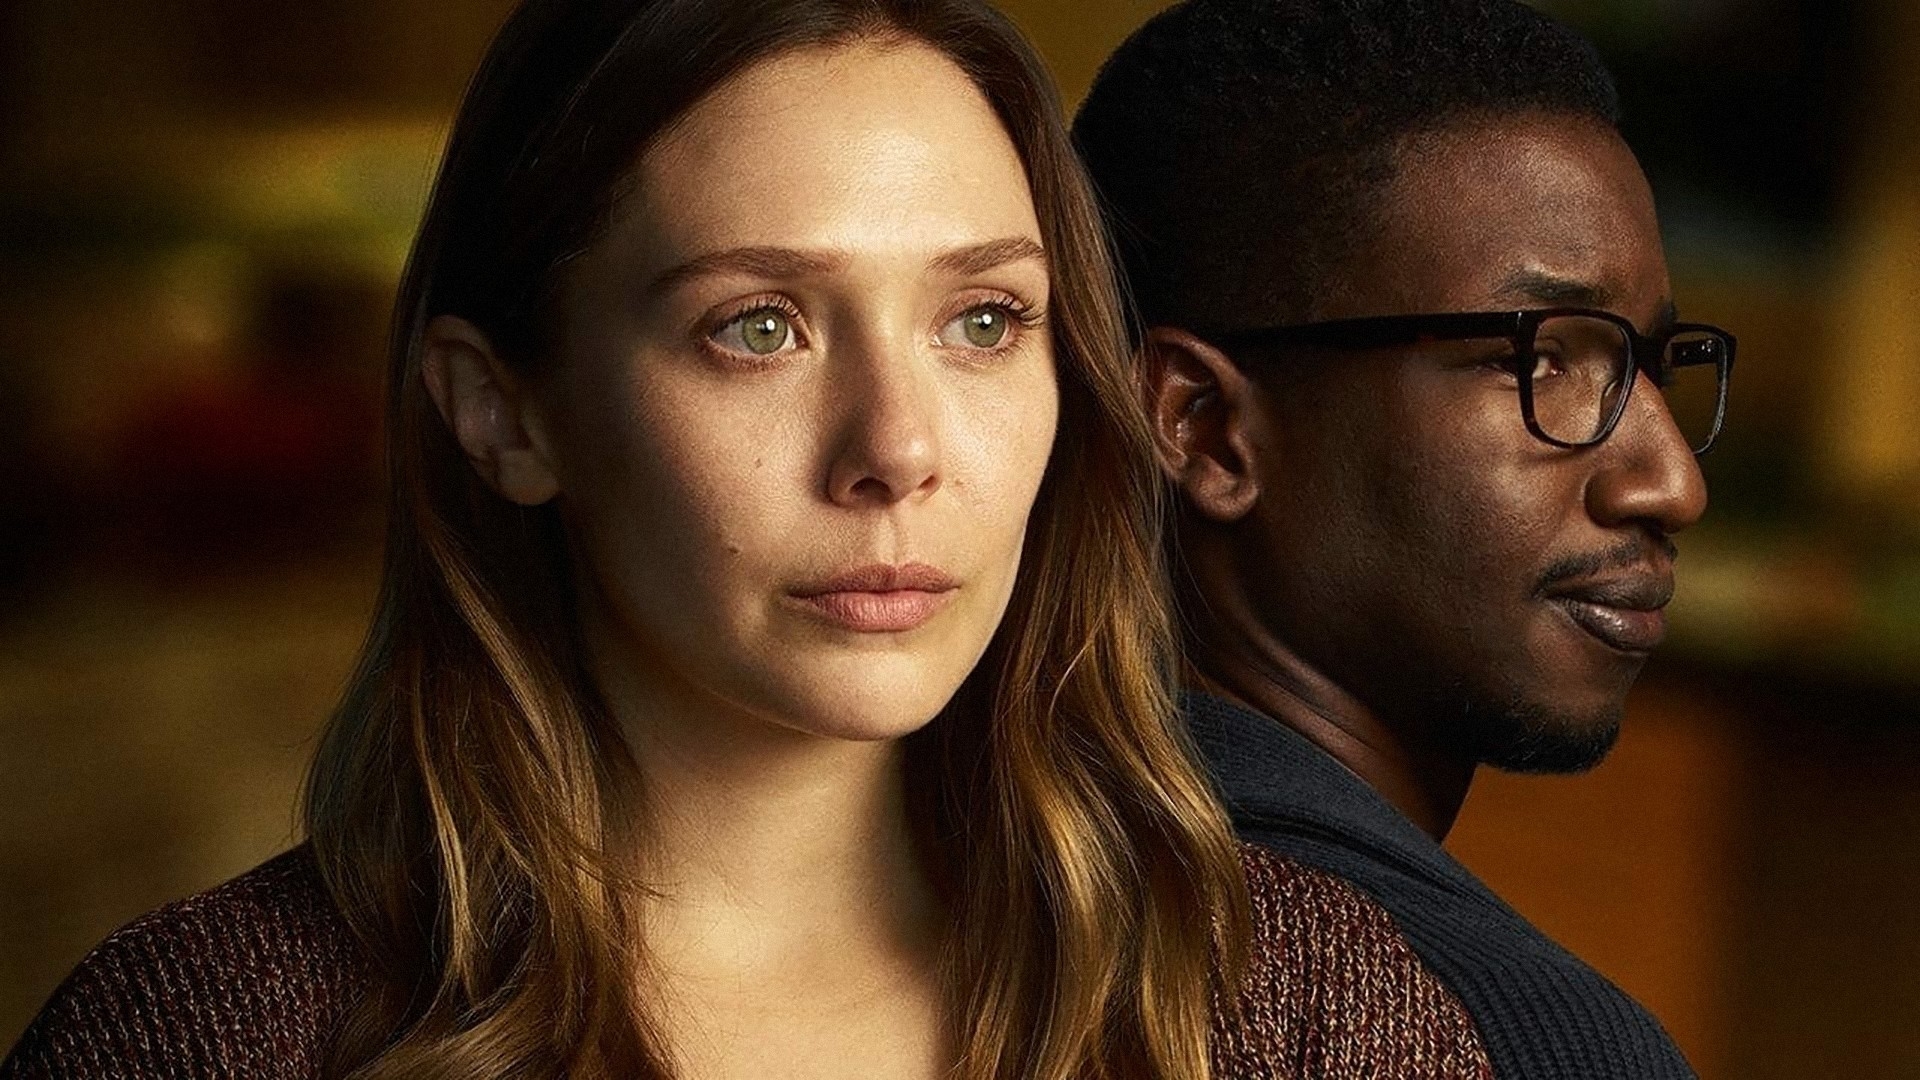 Elizabeth Olsen and Mamoudou Athie in a still from their TV series